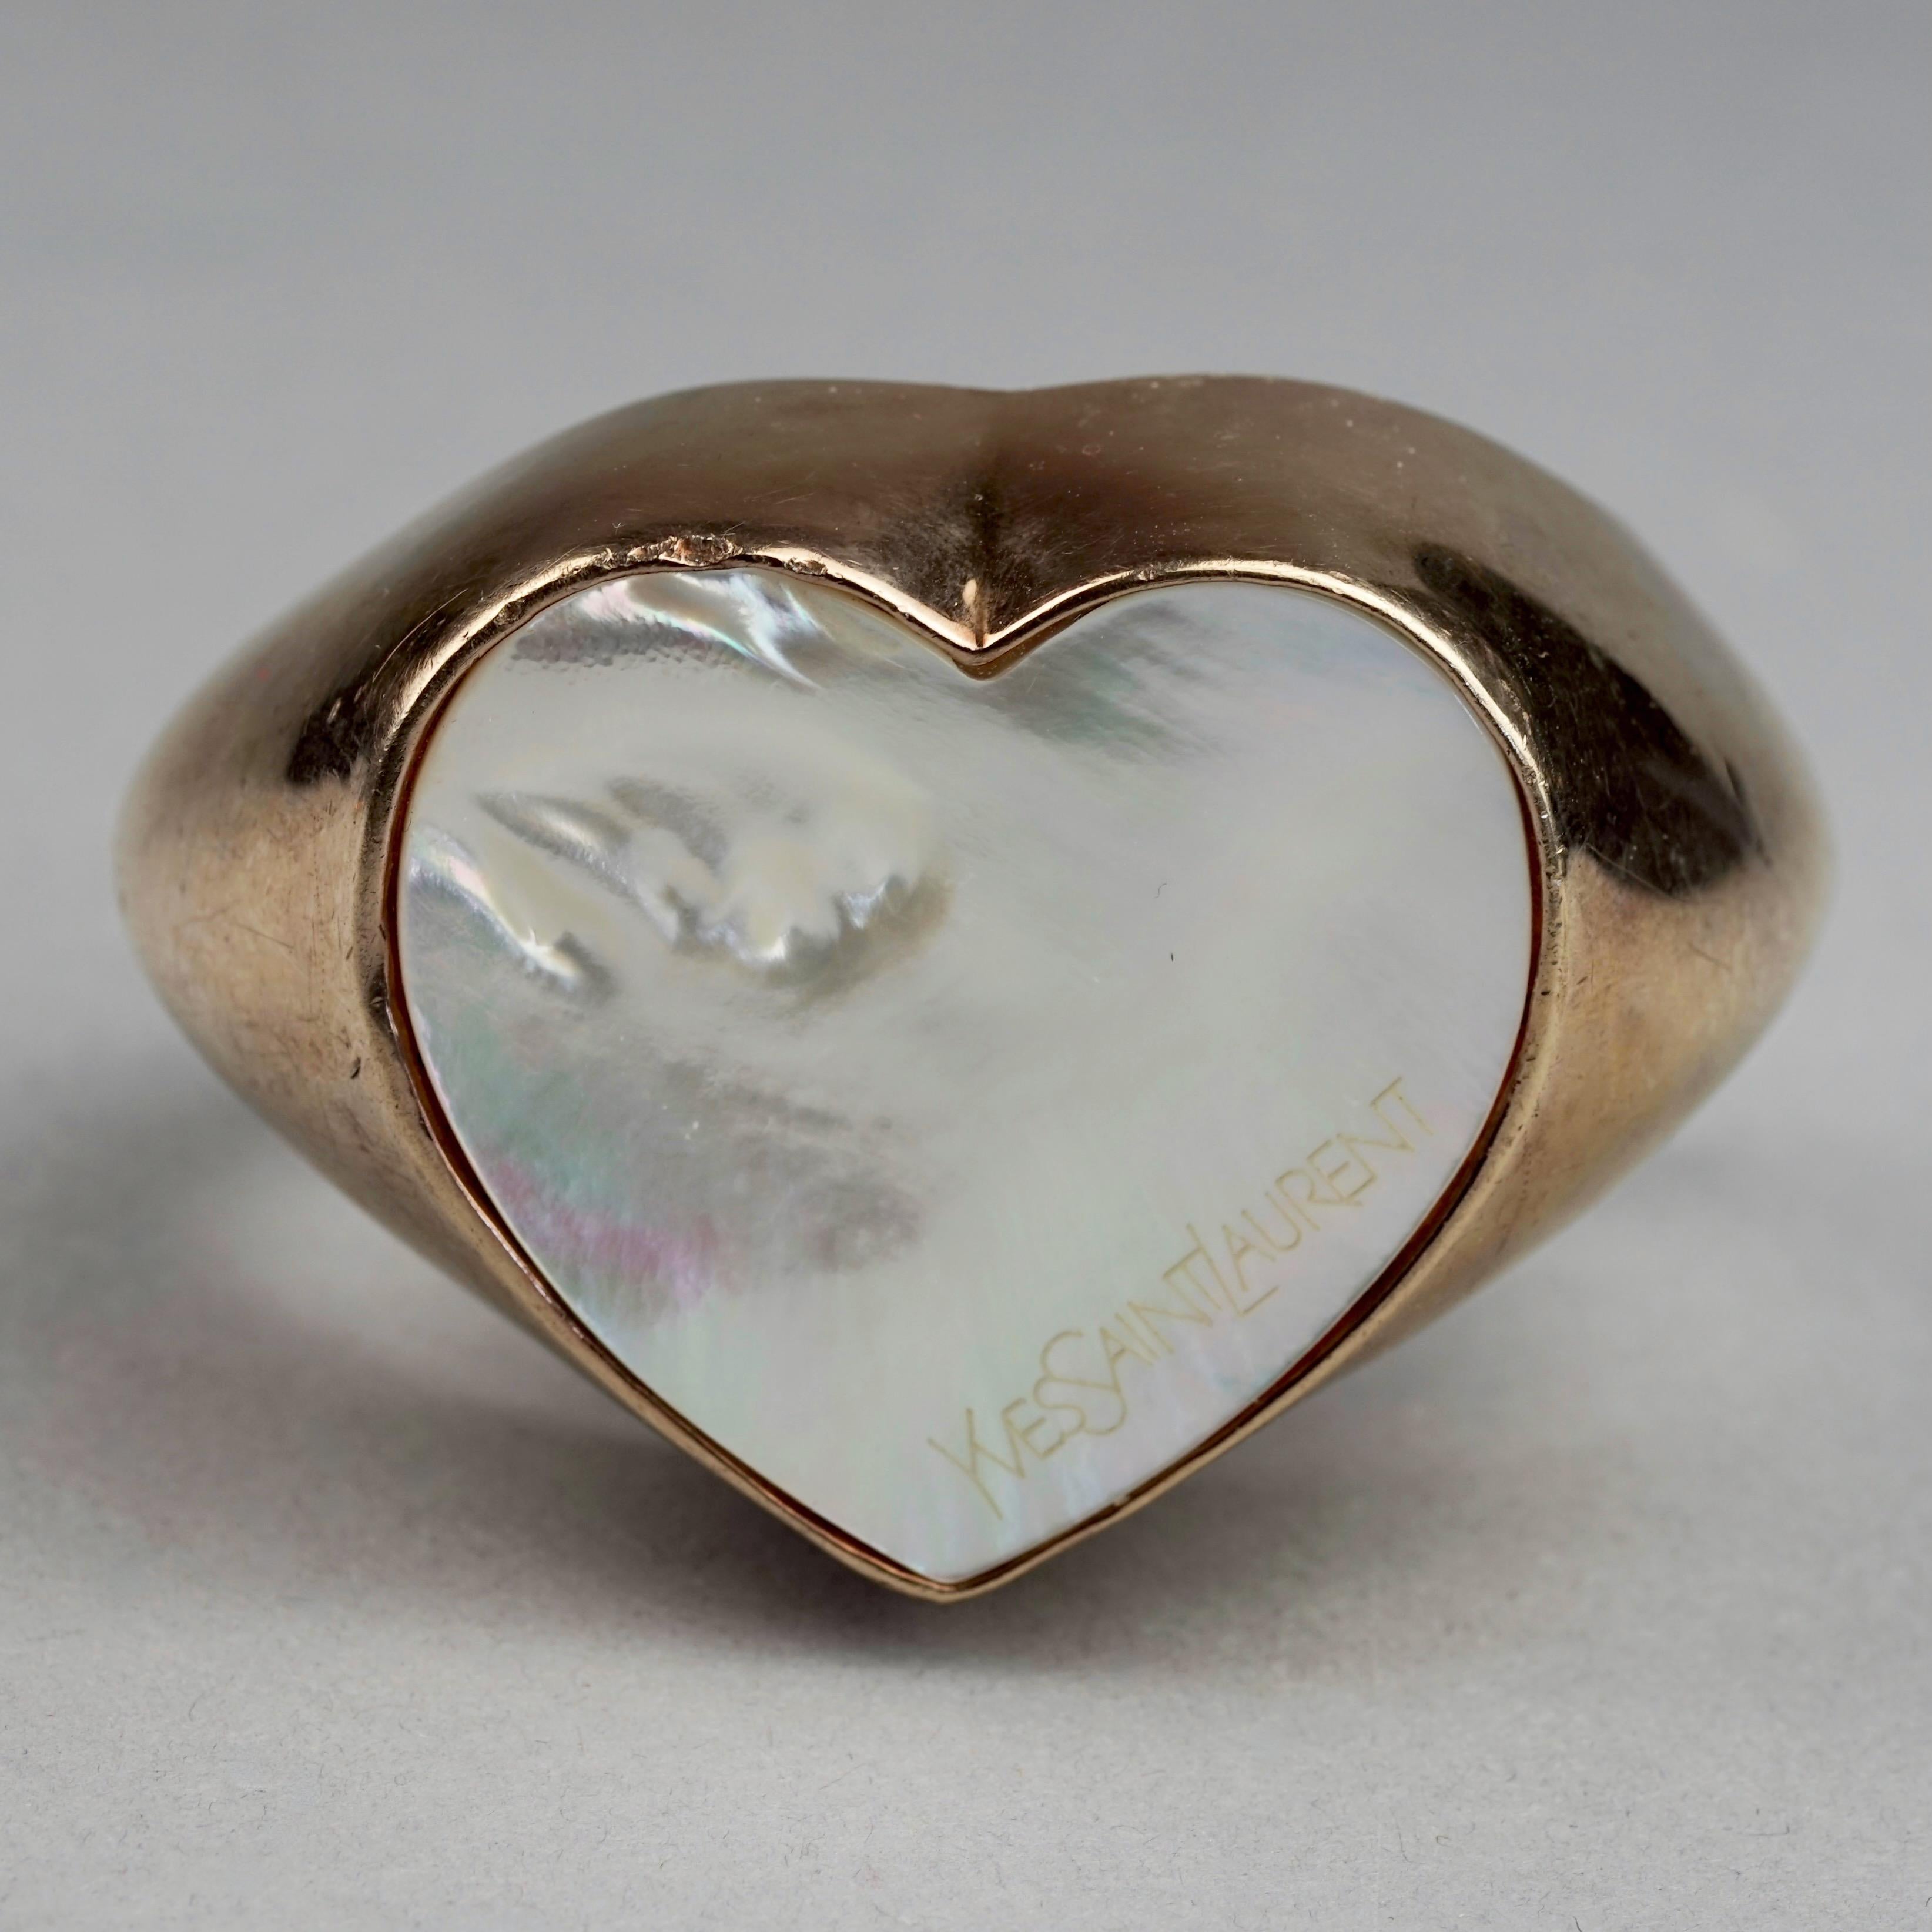 YVES SAINT LAURENT Mother of Pearl Heart Vermeil Sterling Silver Cuff Bracelet In Good Condition For Sale In Kingersheim, Alsace